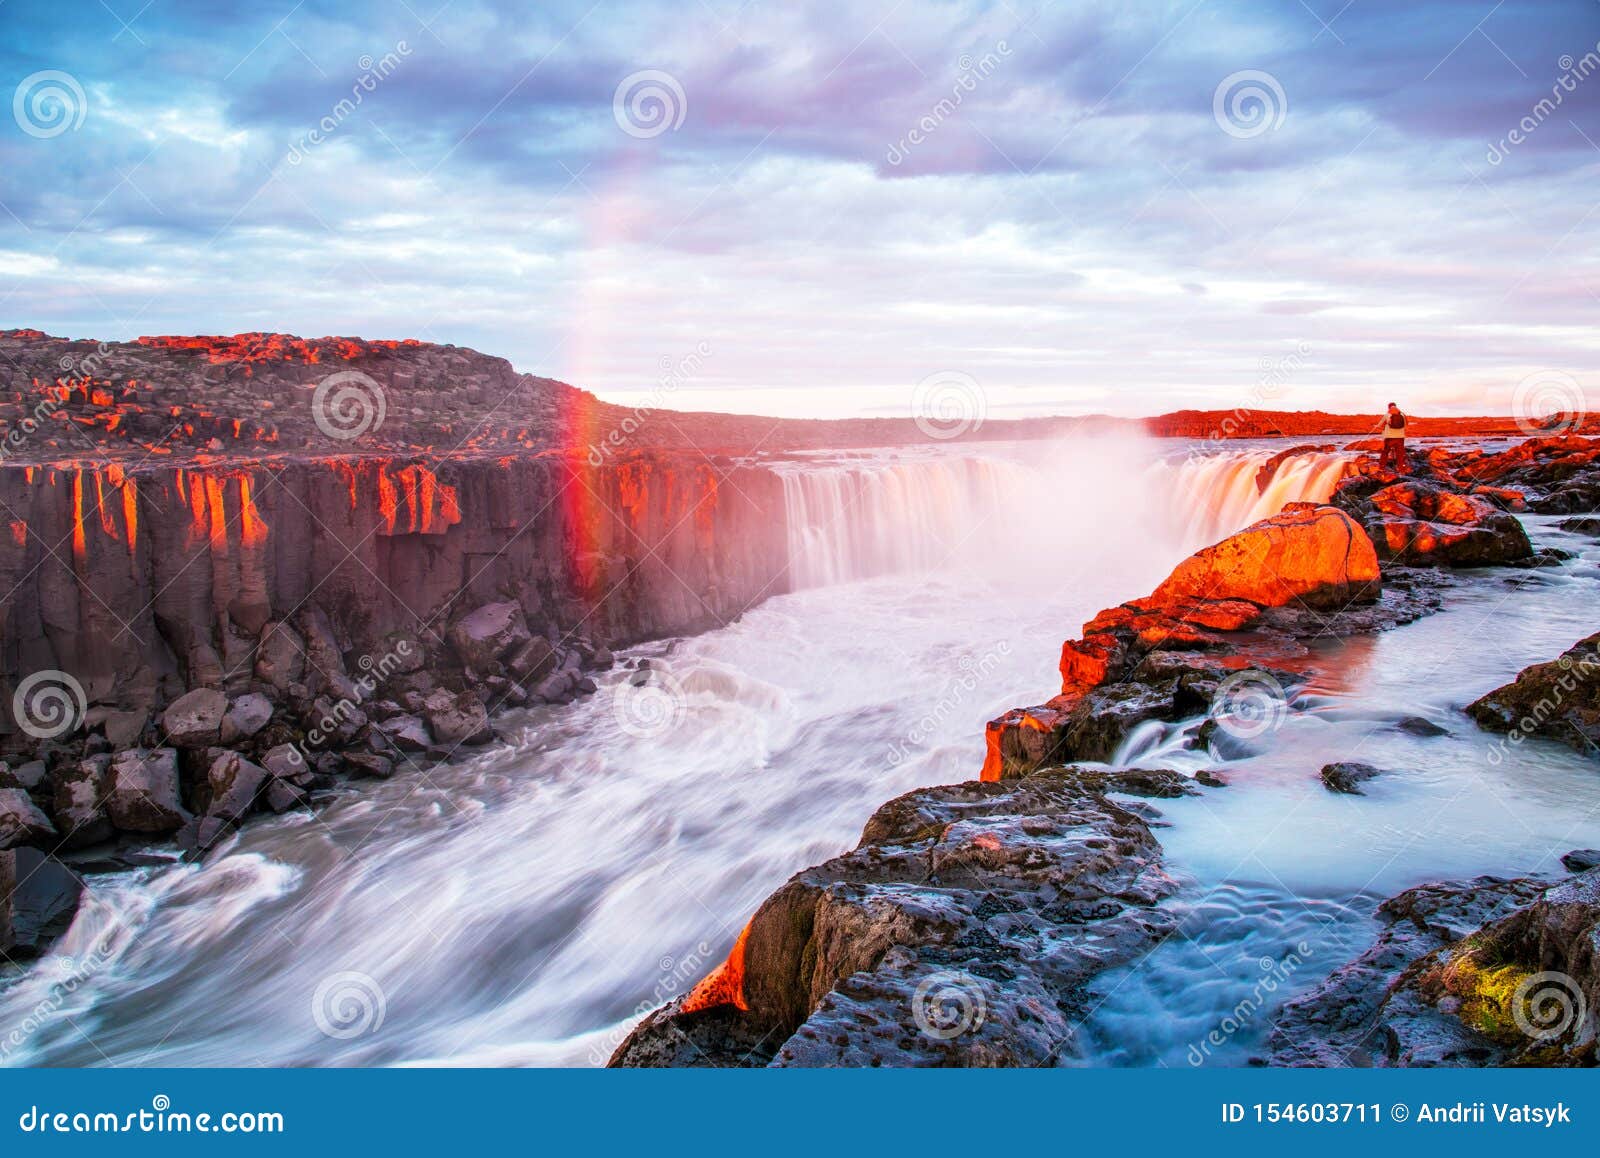 charming beautiful waterfall selfoss in iceland with rainbow. exotic countries. amazing places. popular tourist atraction